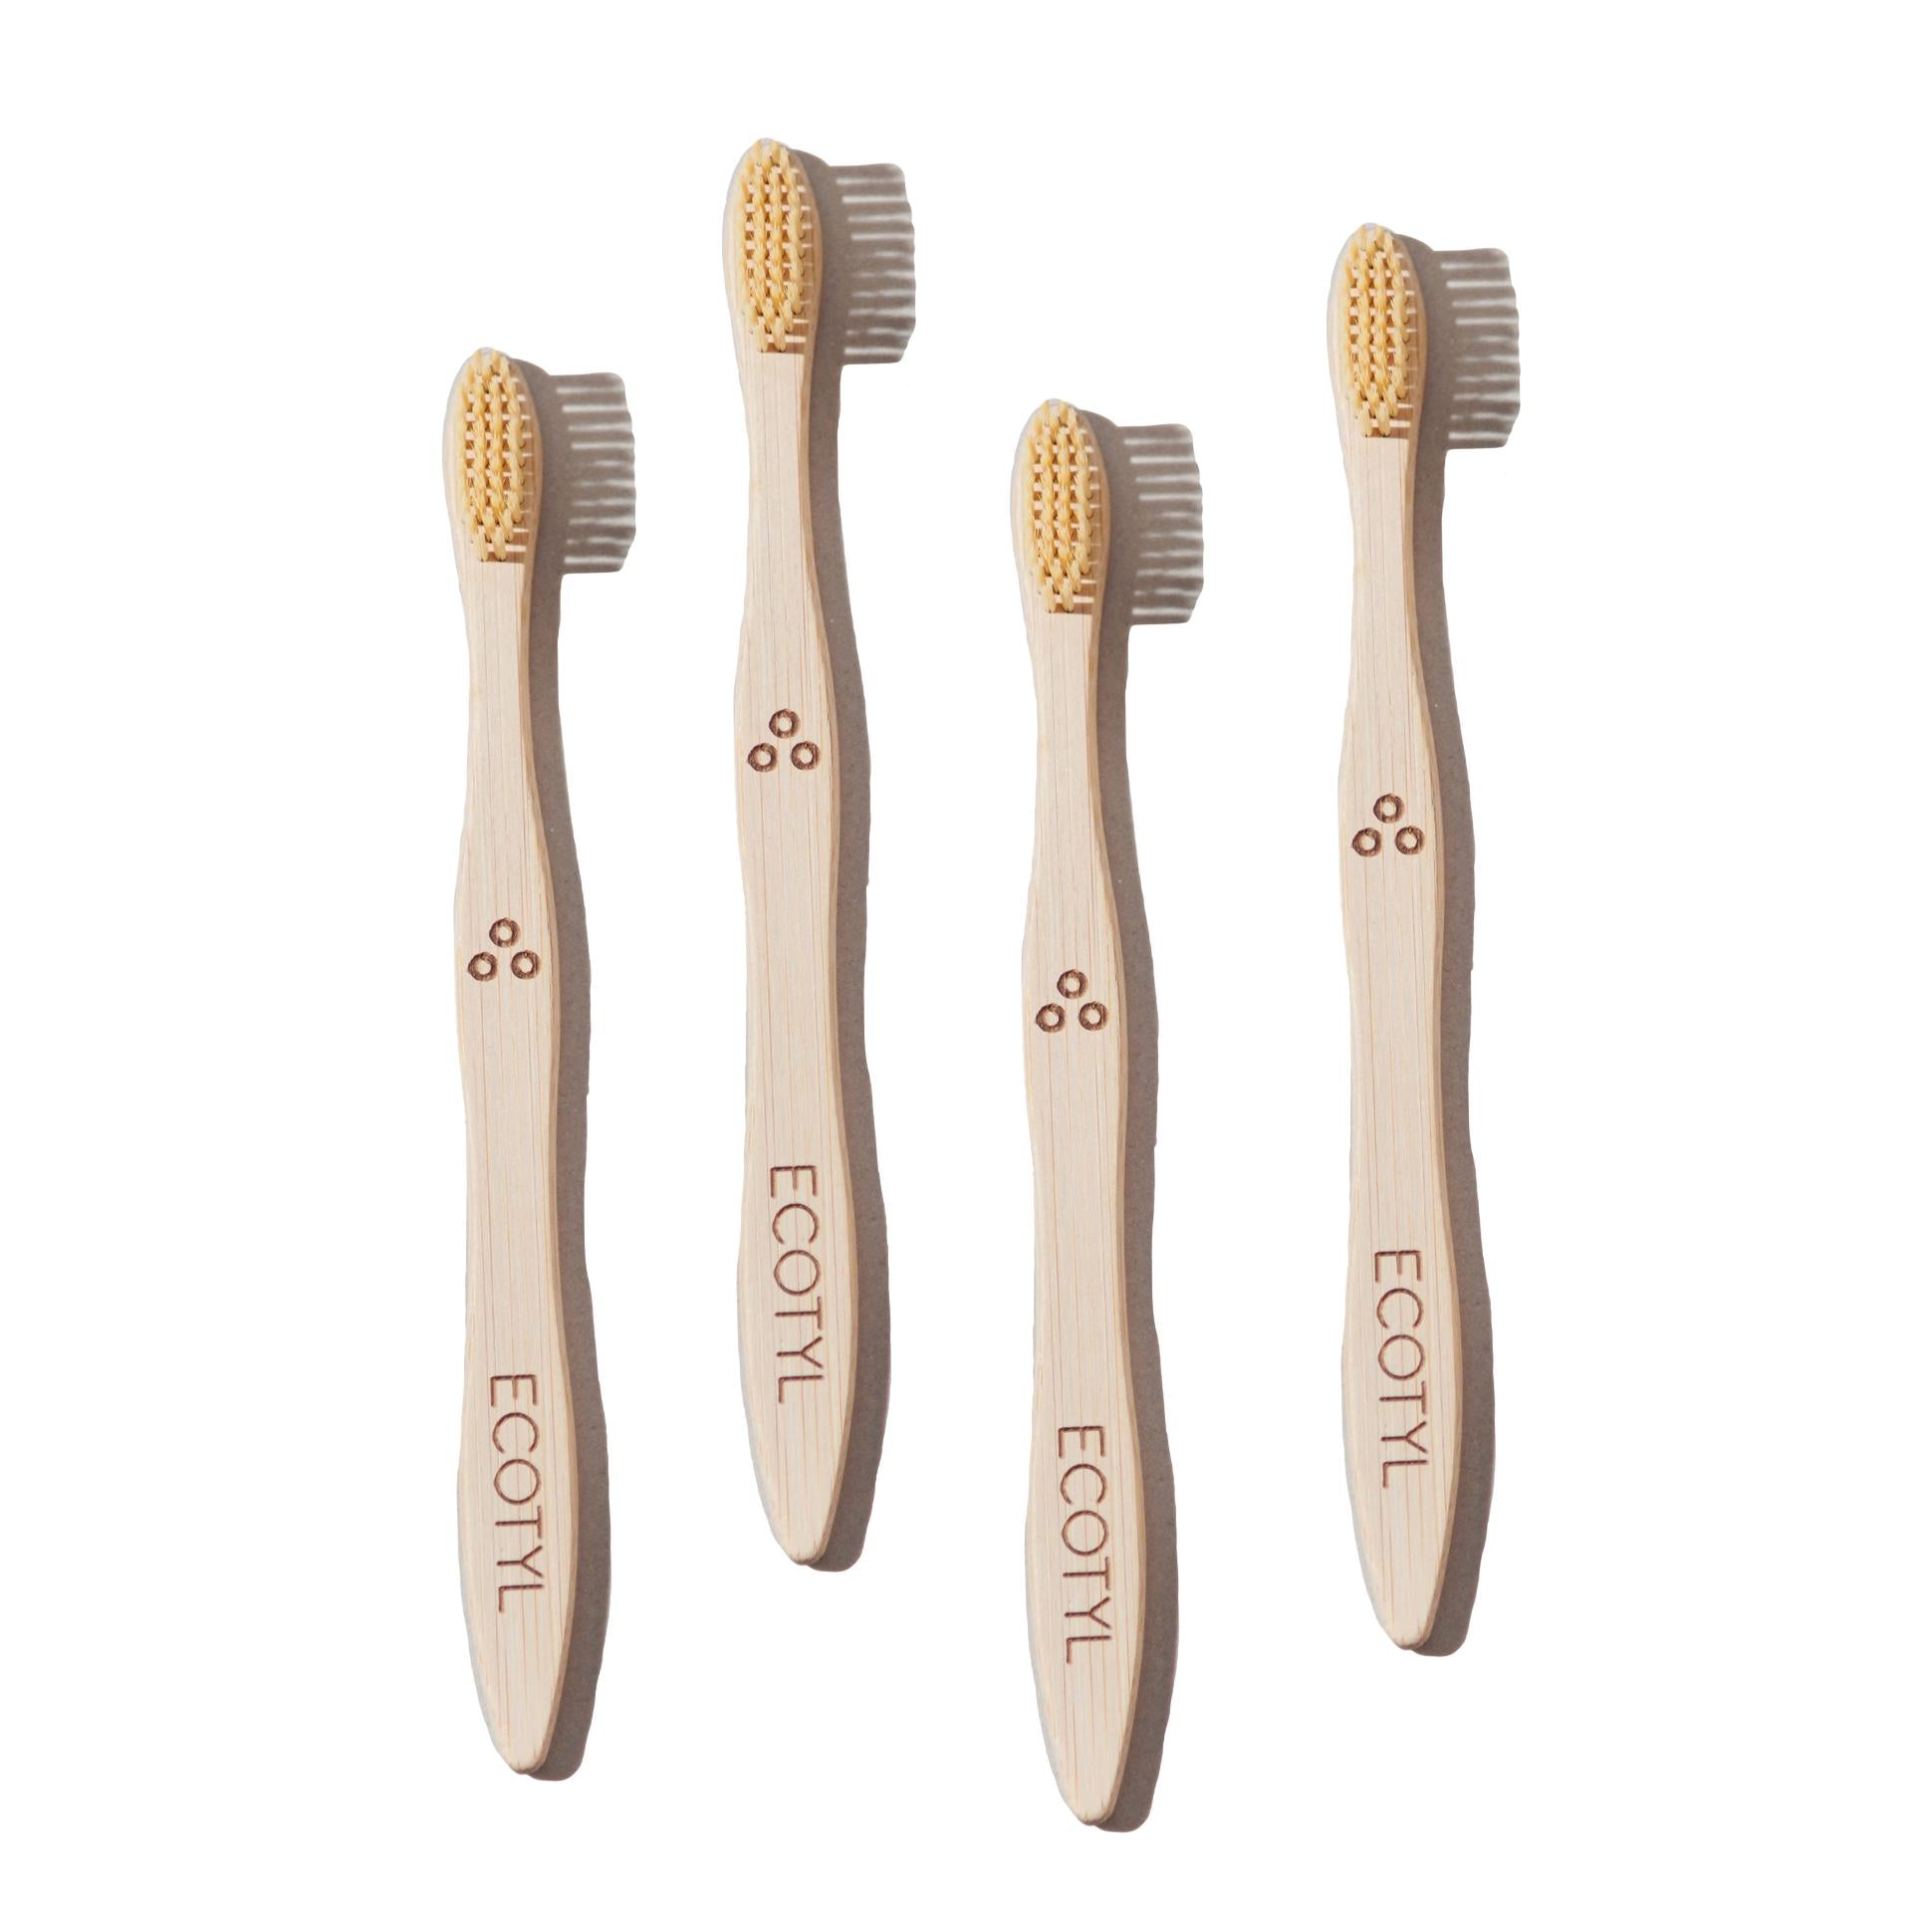 Ecotyl Bamboo Tooth Brush | Ultra Soft Bristles | Thorough Cleaning | Set of 4